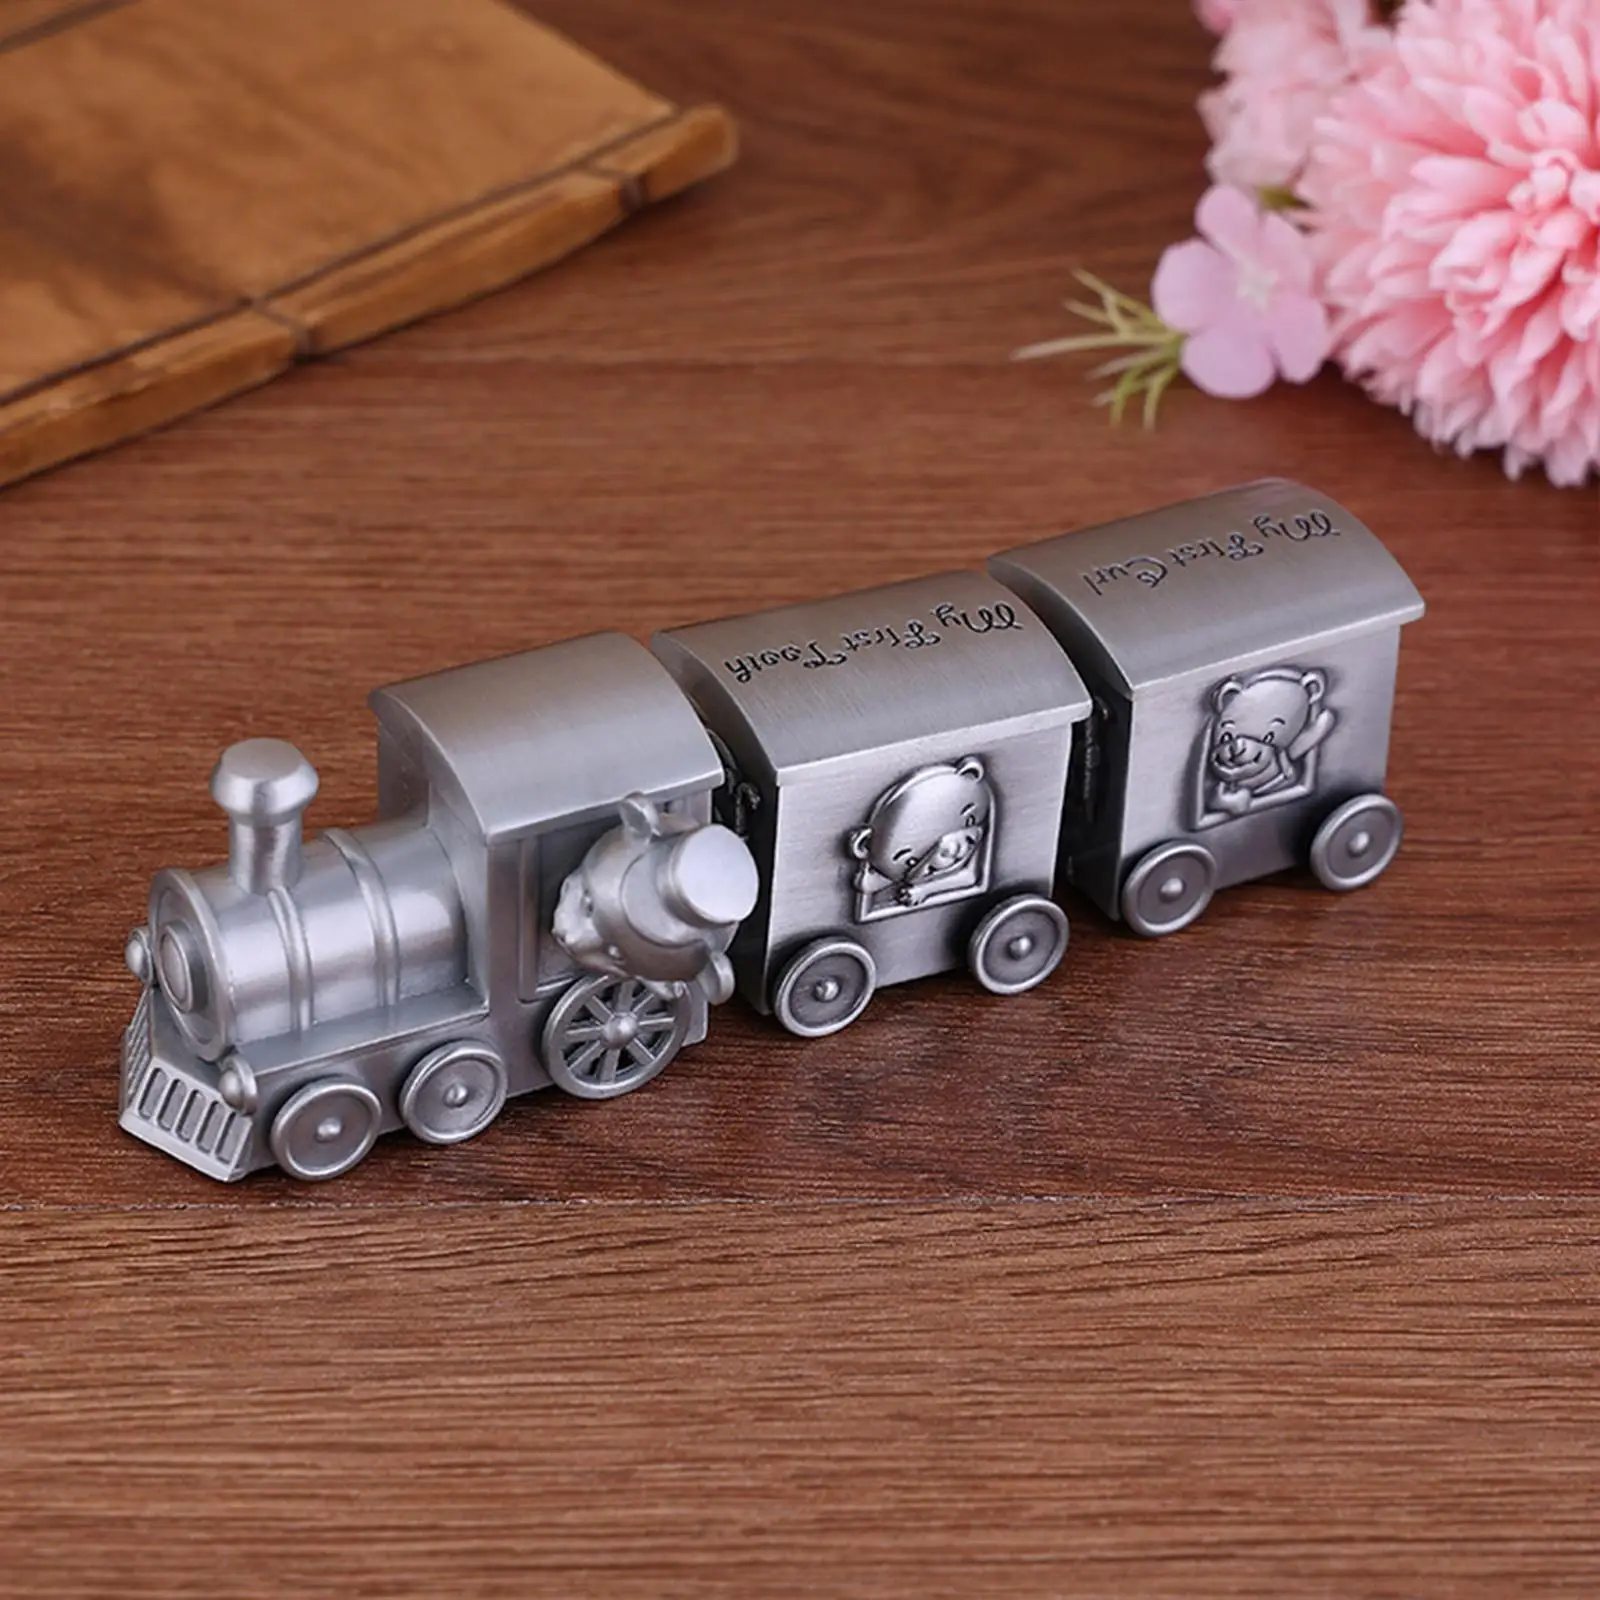 Baby Collections Box Storage Childhood Memory Metal Container Train Tooth Holder for Baby Shower Childhood Souvenir Nusery Decor